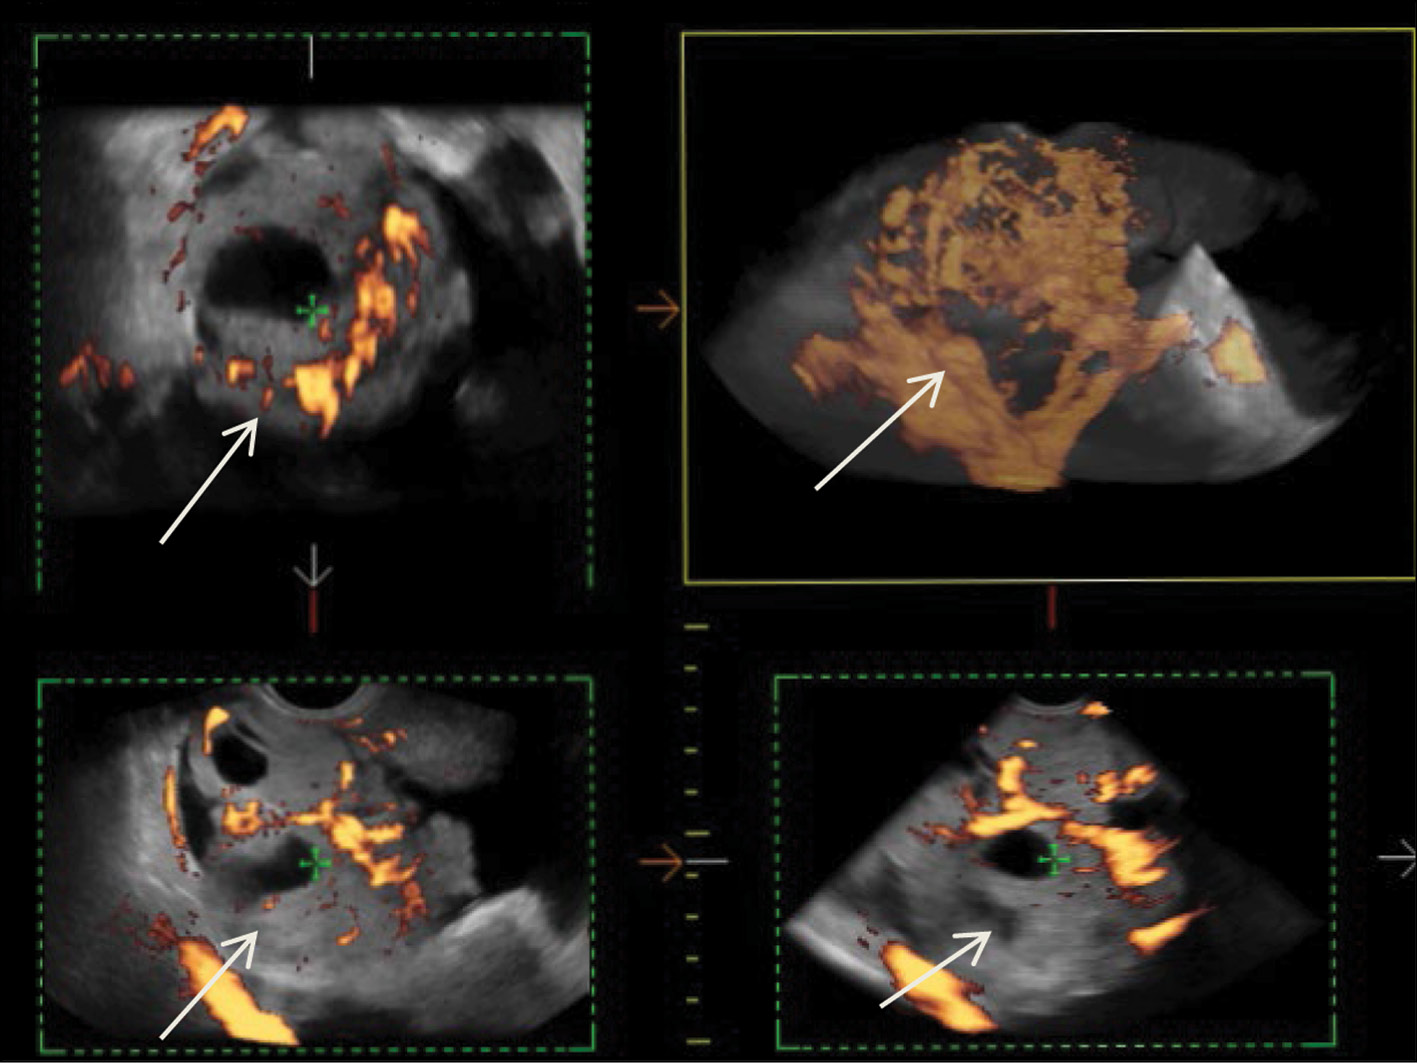 Radiation methods in the diagnosis of primary and recurrent malignant ovarian struma: A case report